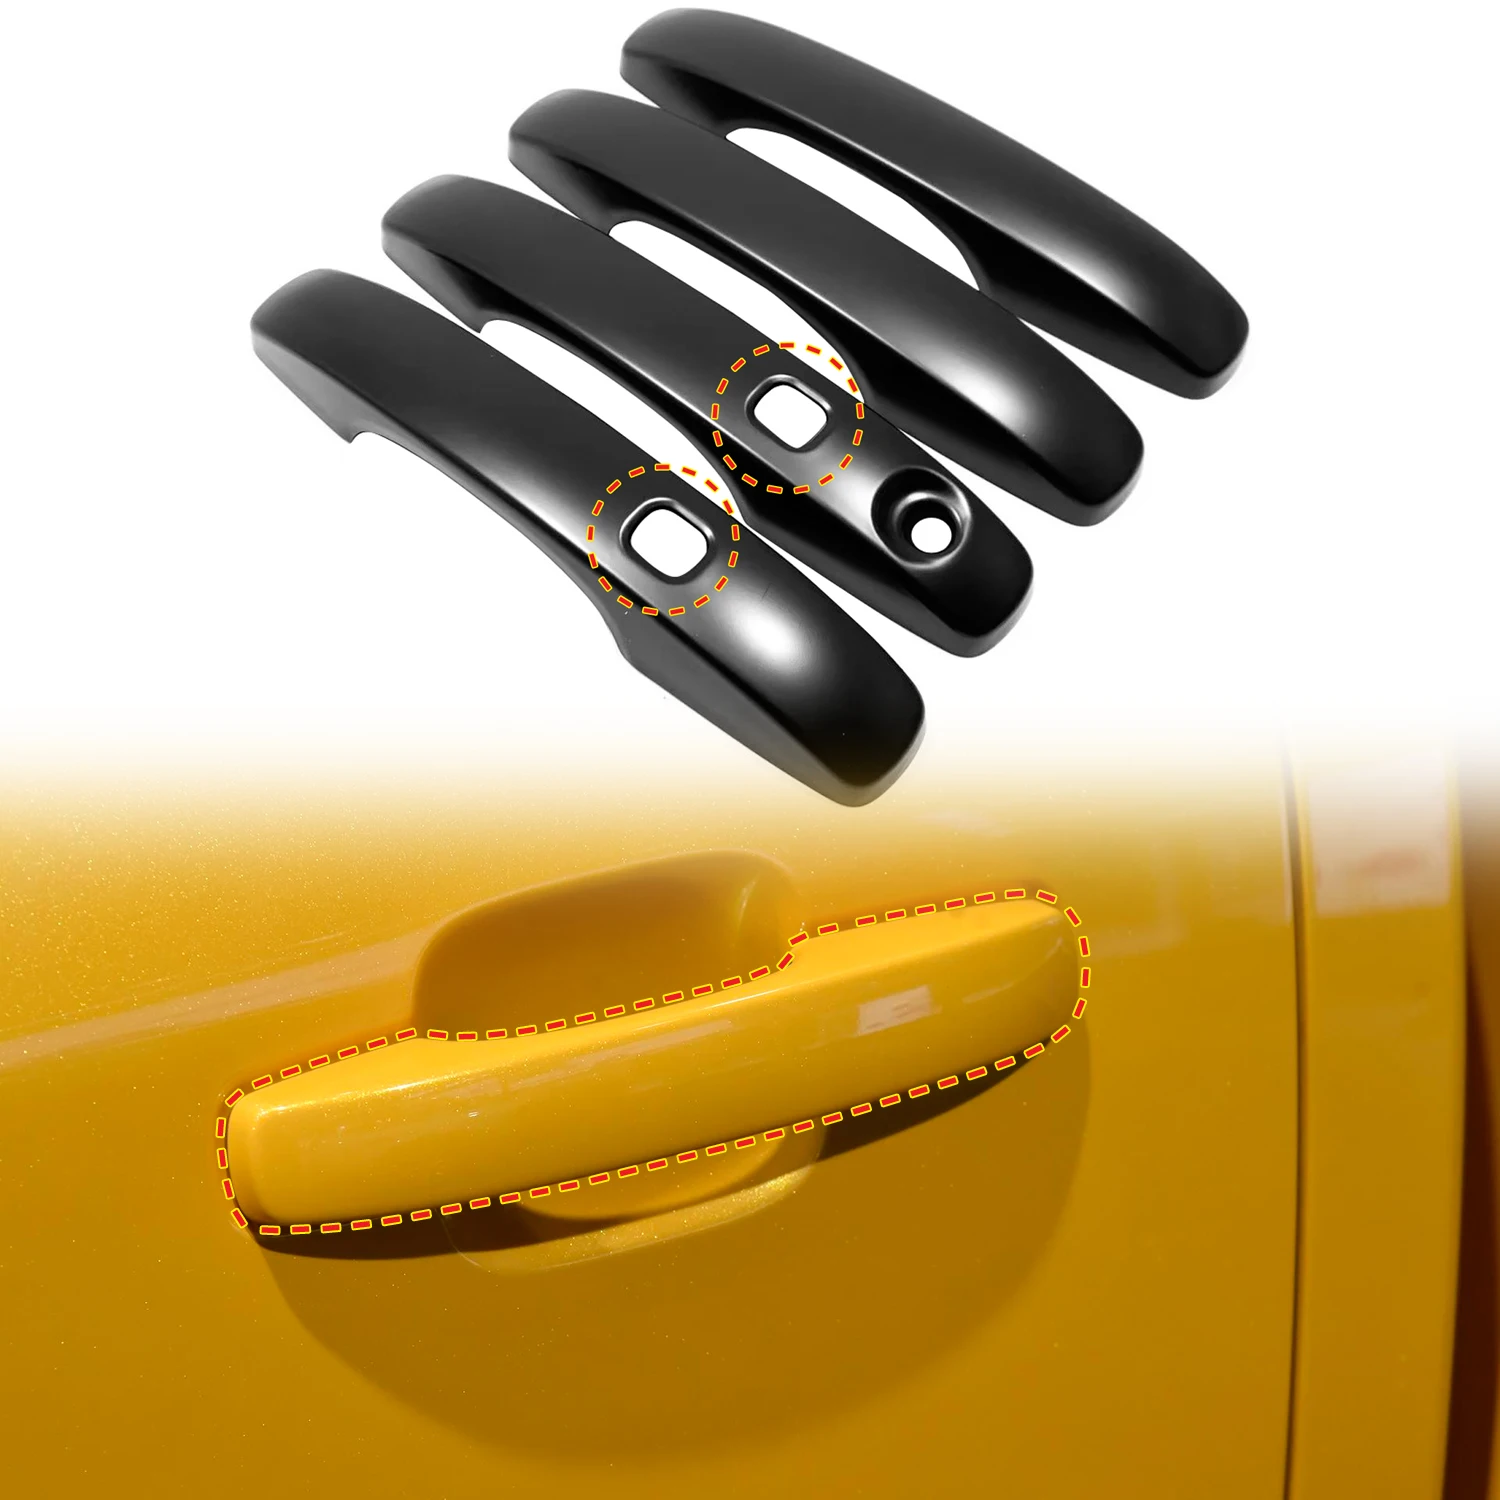 for Ford Ranger 2023 2024 Car Exterior Accessories Door Handles With  Keyless Entry Cover Trim ABS Plastic 4pcs - AliExpress